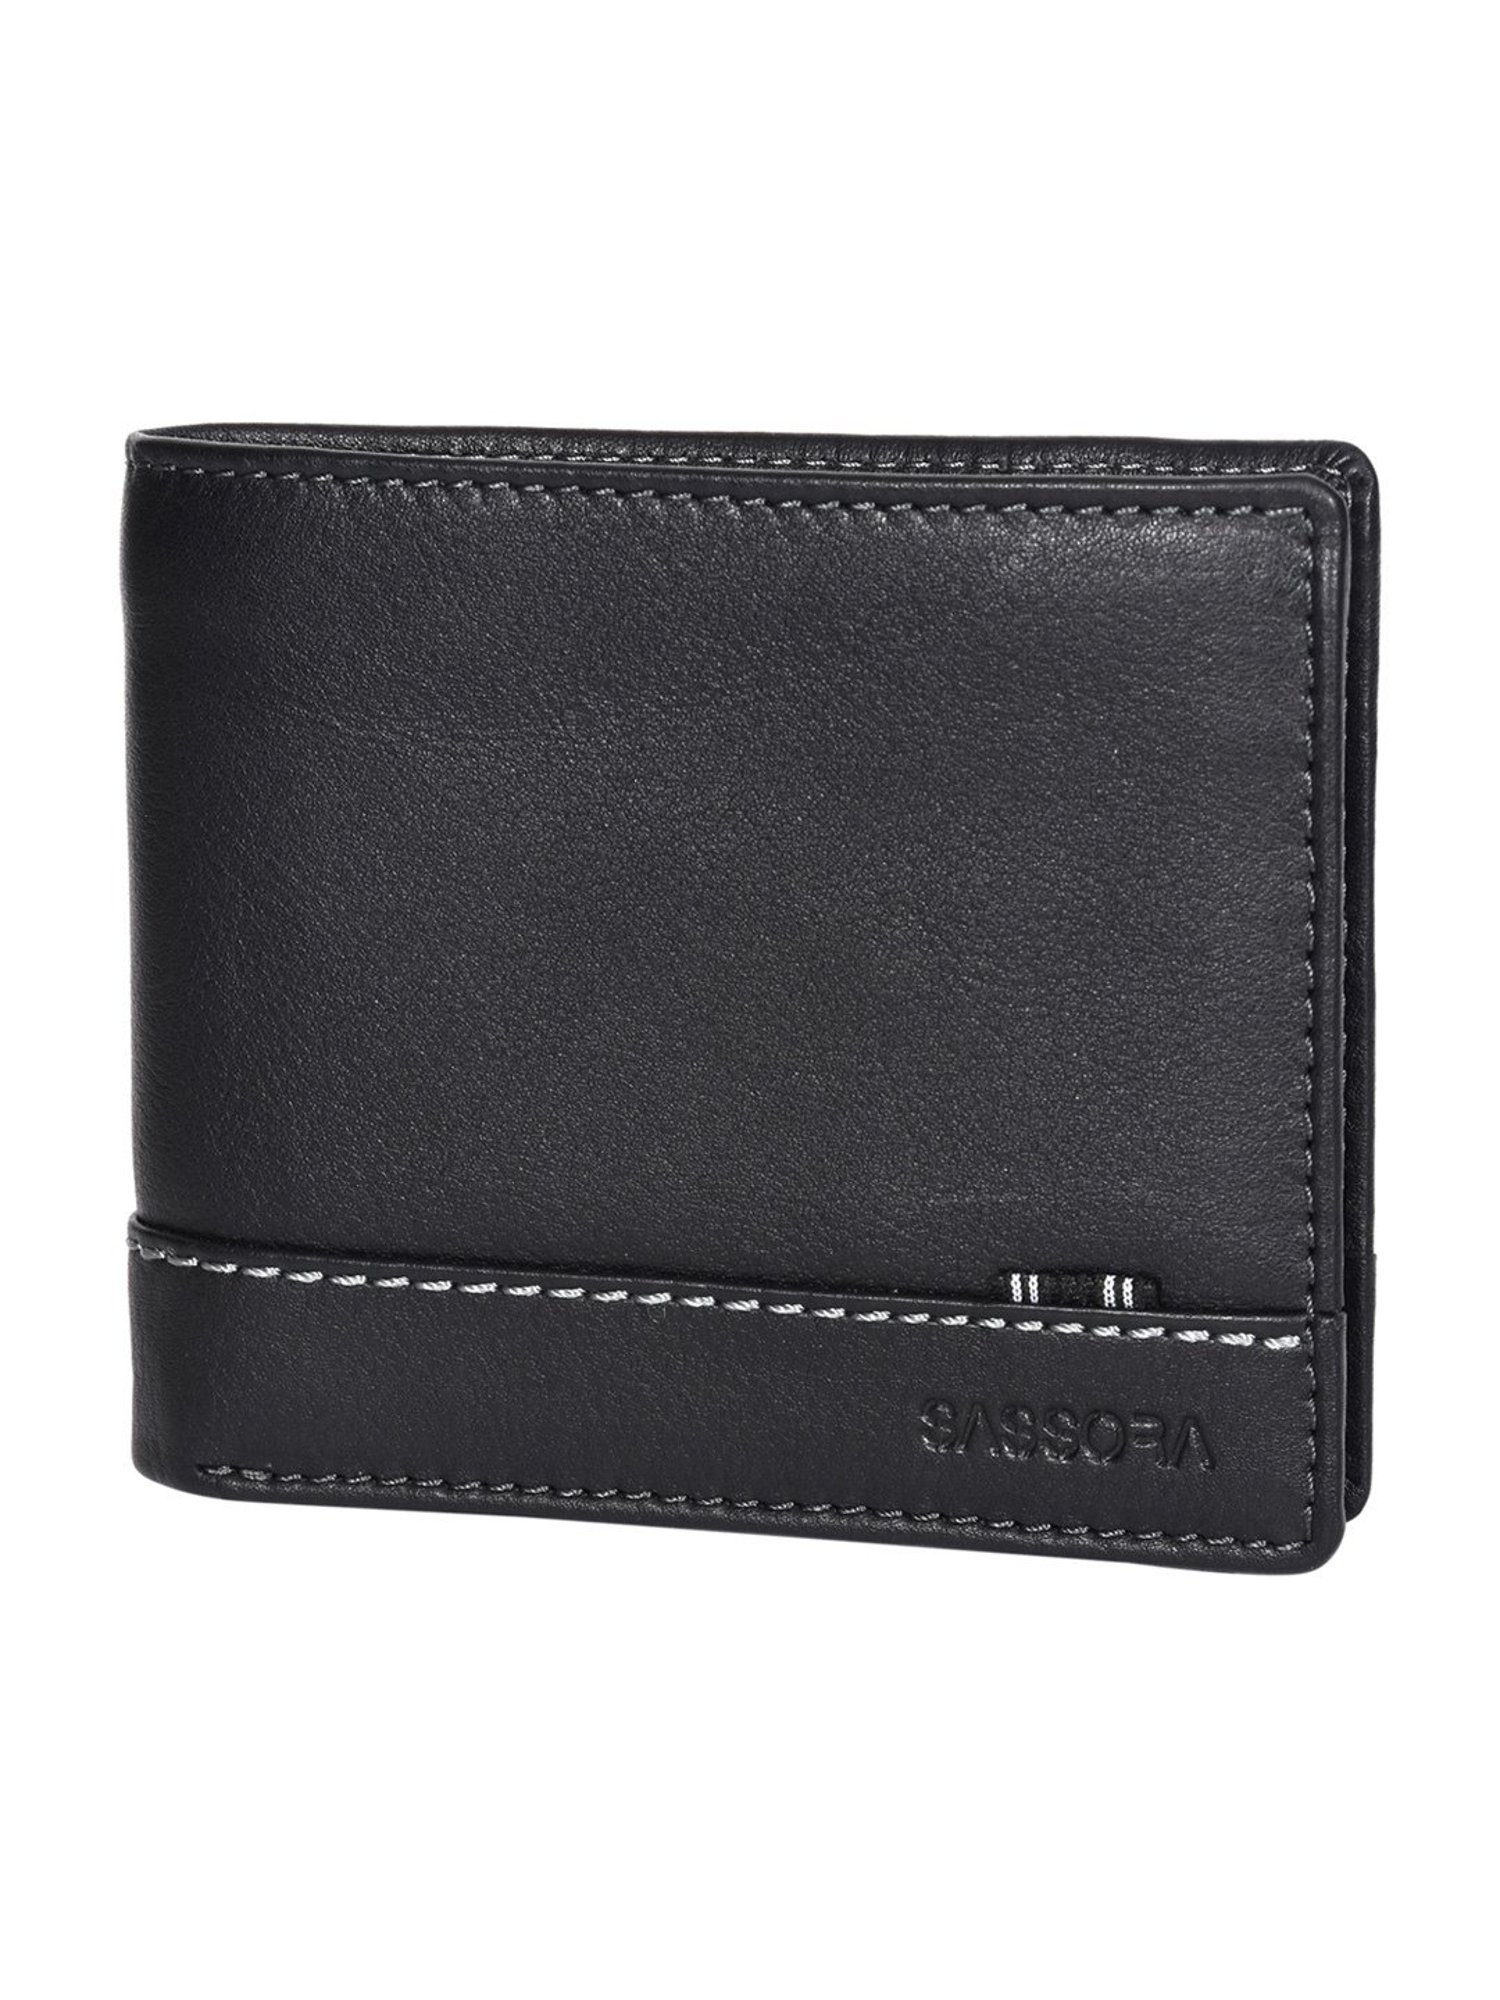 Guess Men's Leather Credit Card Id Wallet Passcase Bifold Black